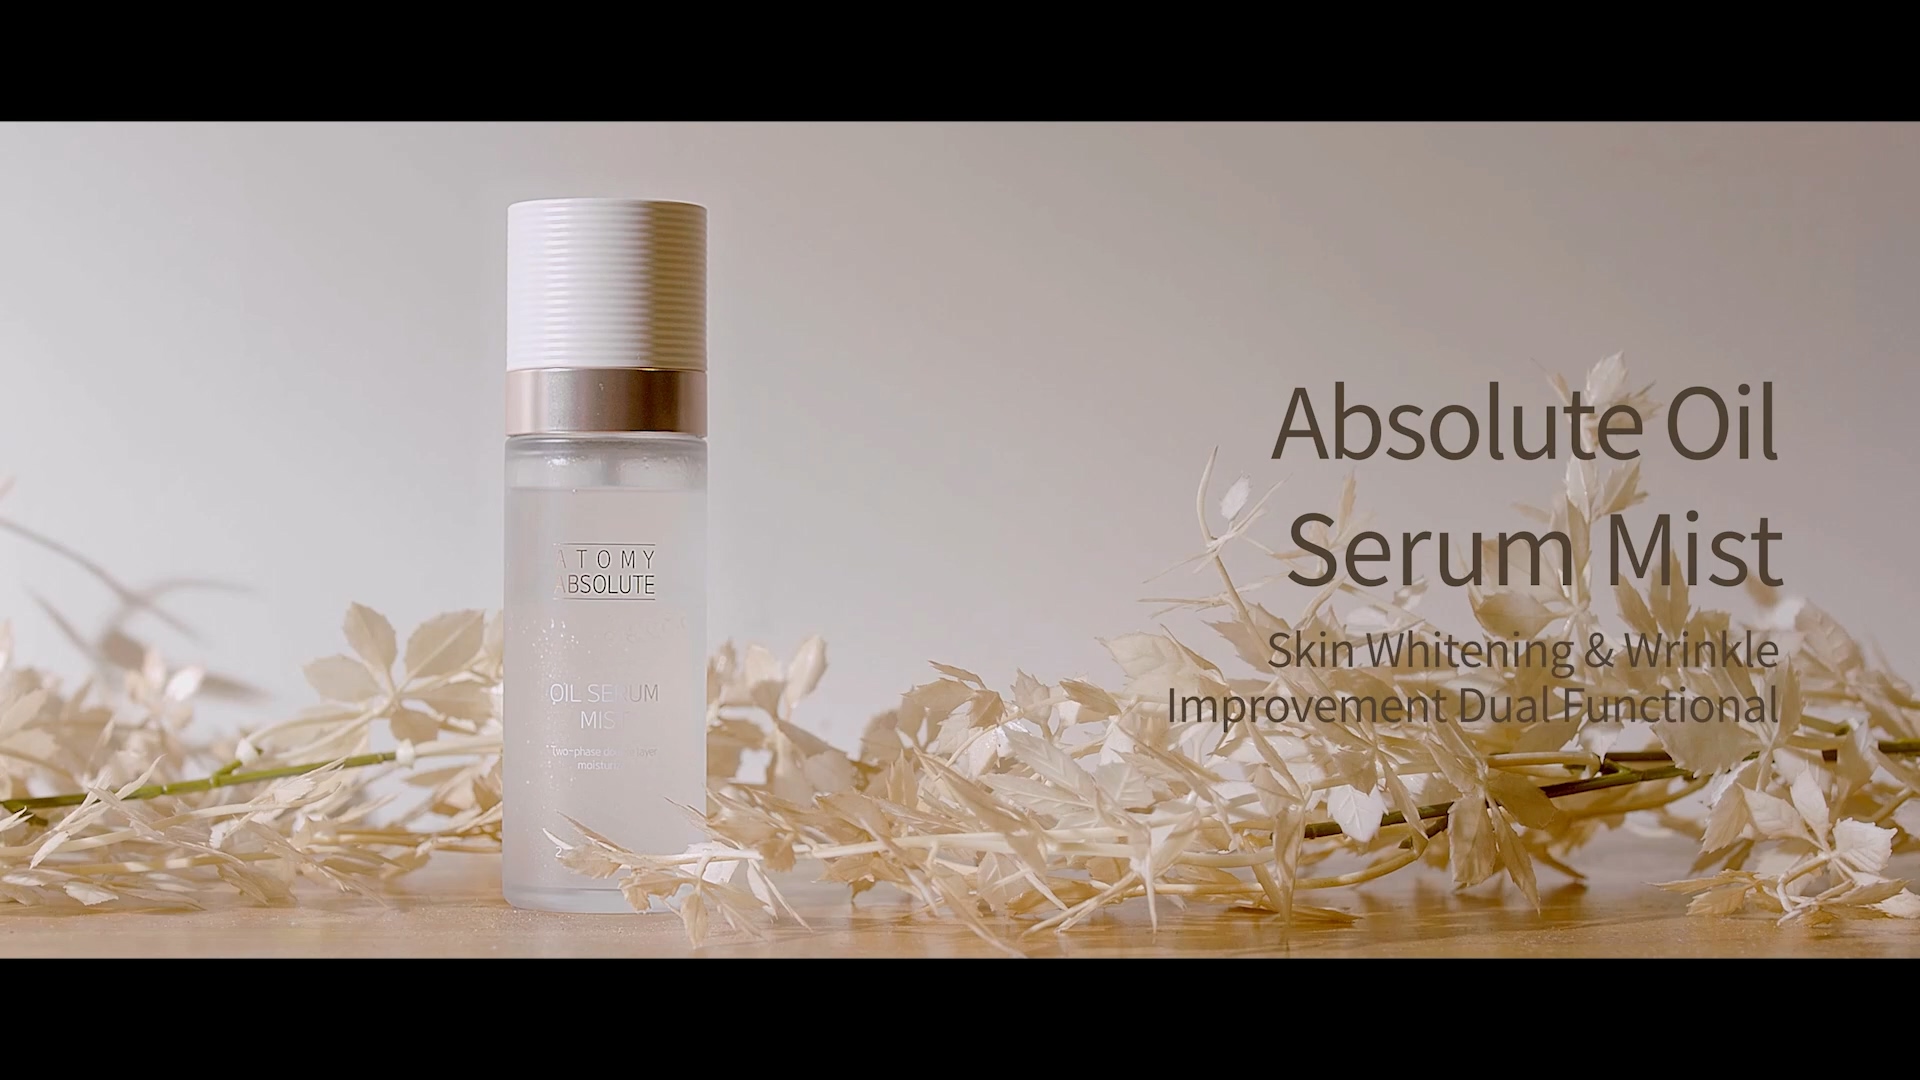 Absolute oil serum mist introduction video